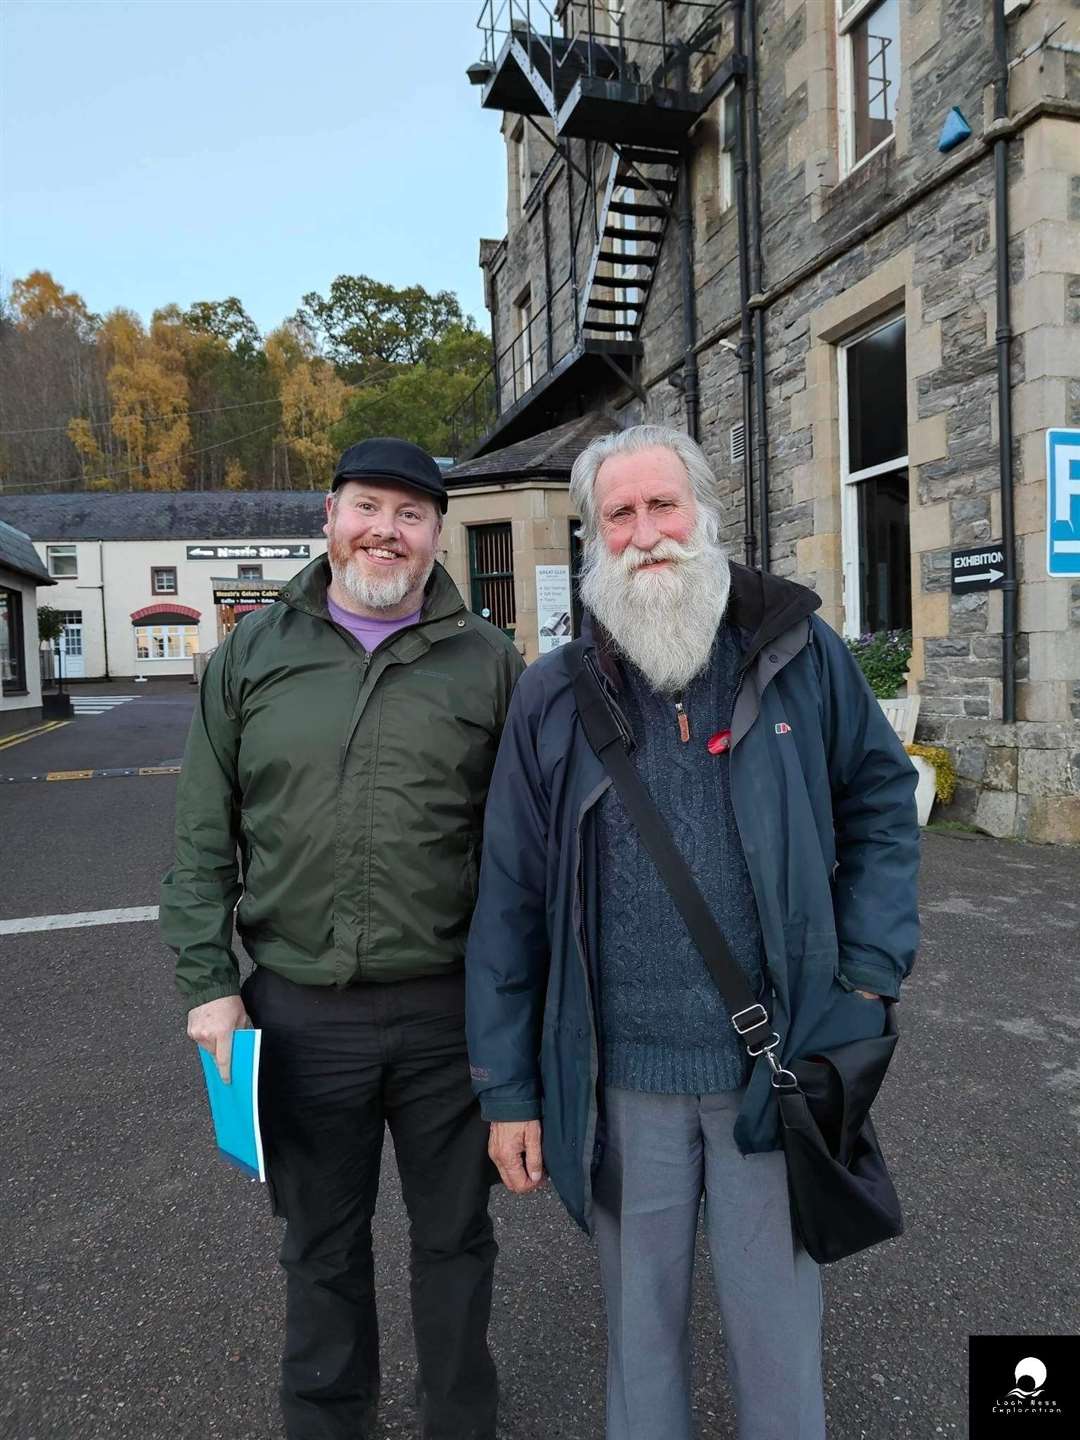 Adrian Shine meets Alan McKenna, of Loch Ness Exploration, a group which brings together sceptics and believers of the Loch Ness Monster.